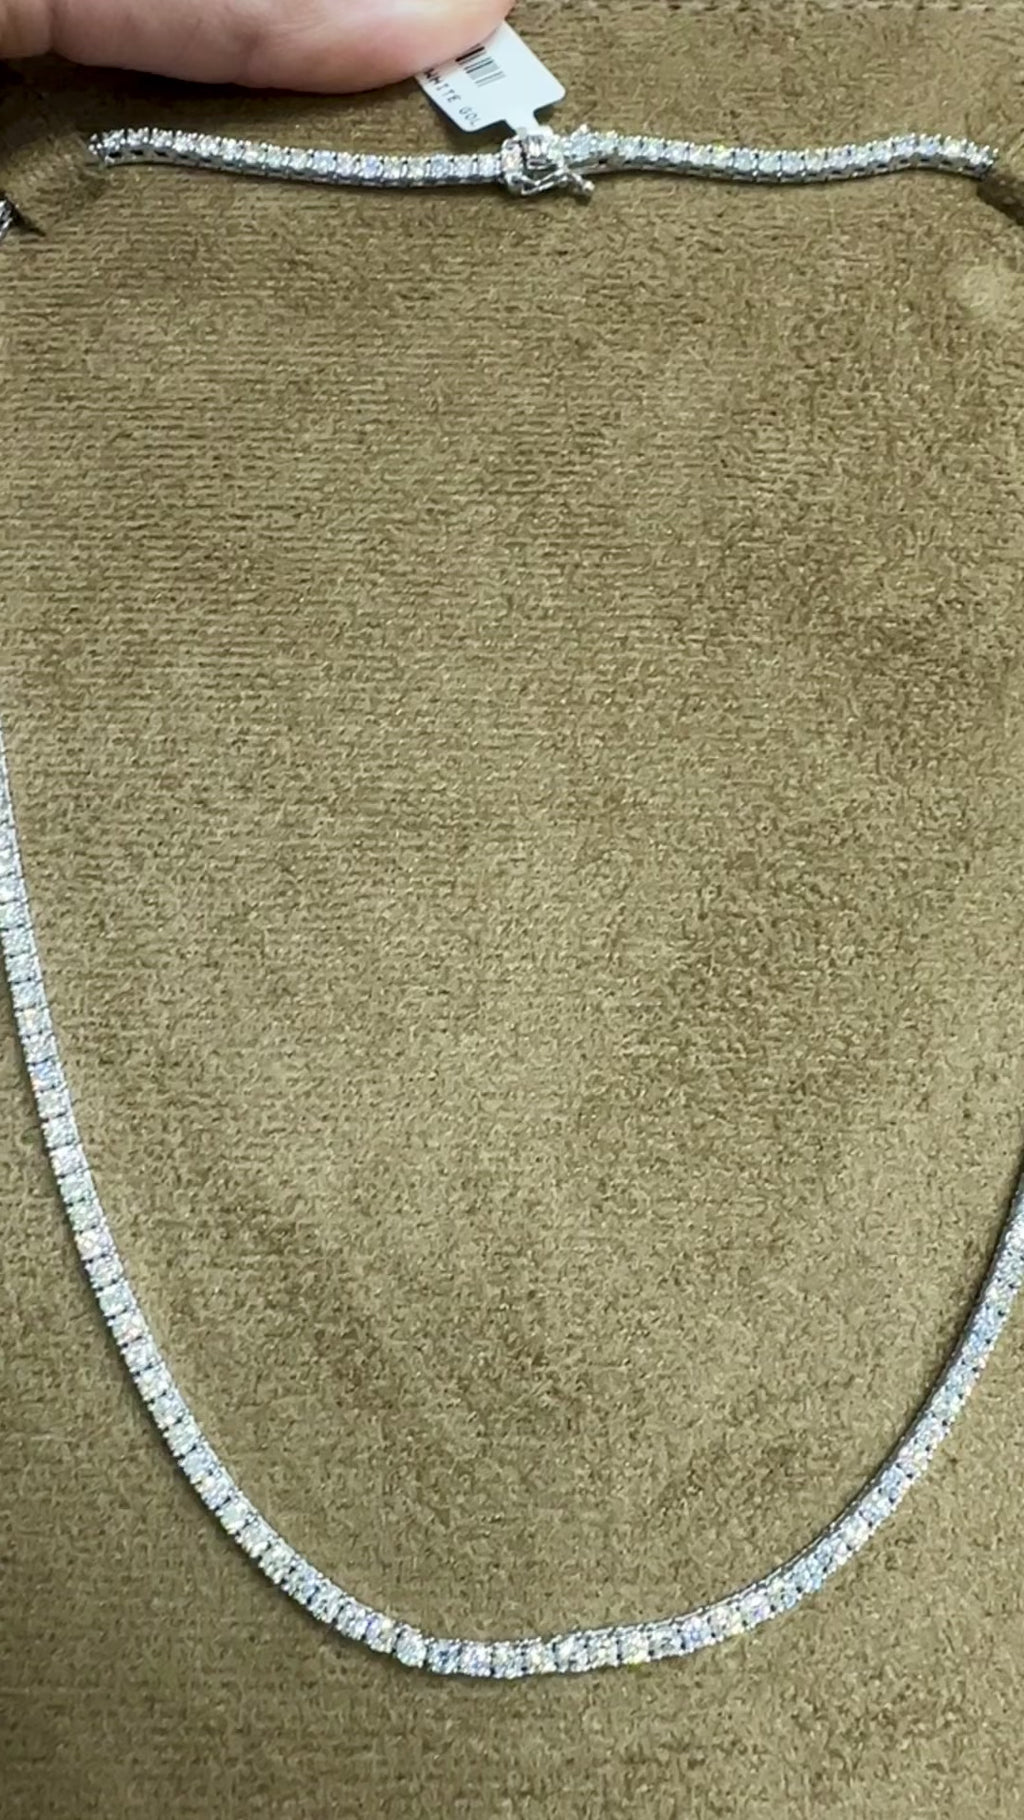 Luxurious Diamond Necklaces Crafted with Precision | Davizi Jewels New York